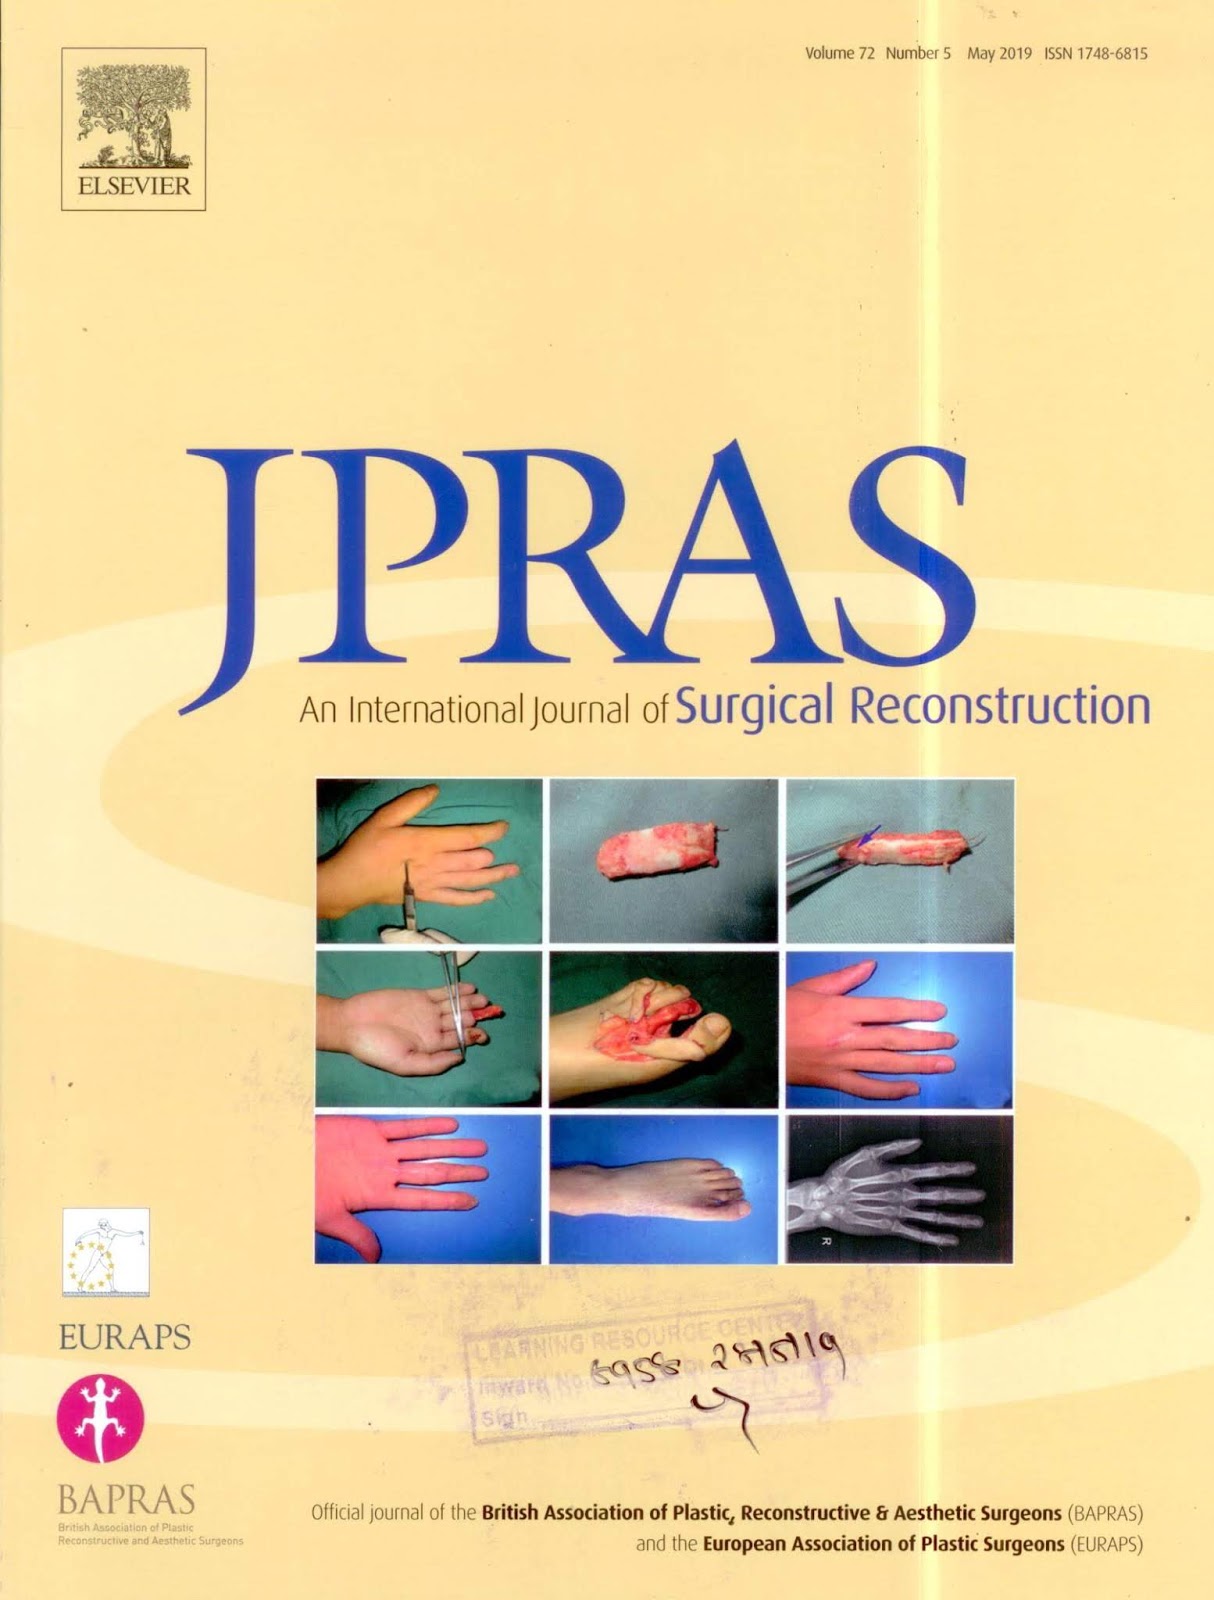 https://www.sciencedirect.com/journal/journal-of-plastic-reconstructive-and-aesthetic-surgery/vol/72/issue/5